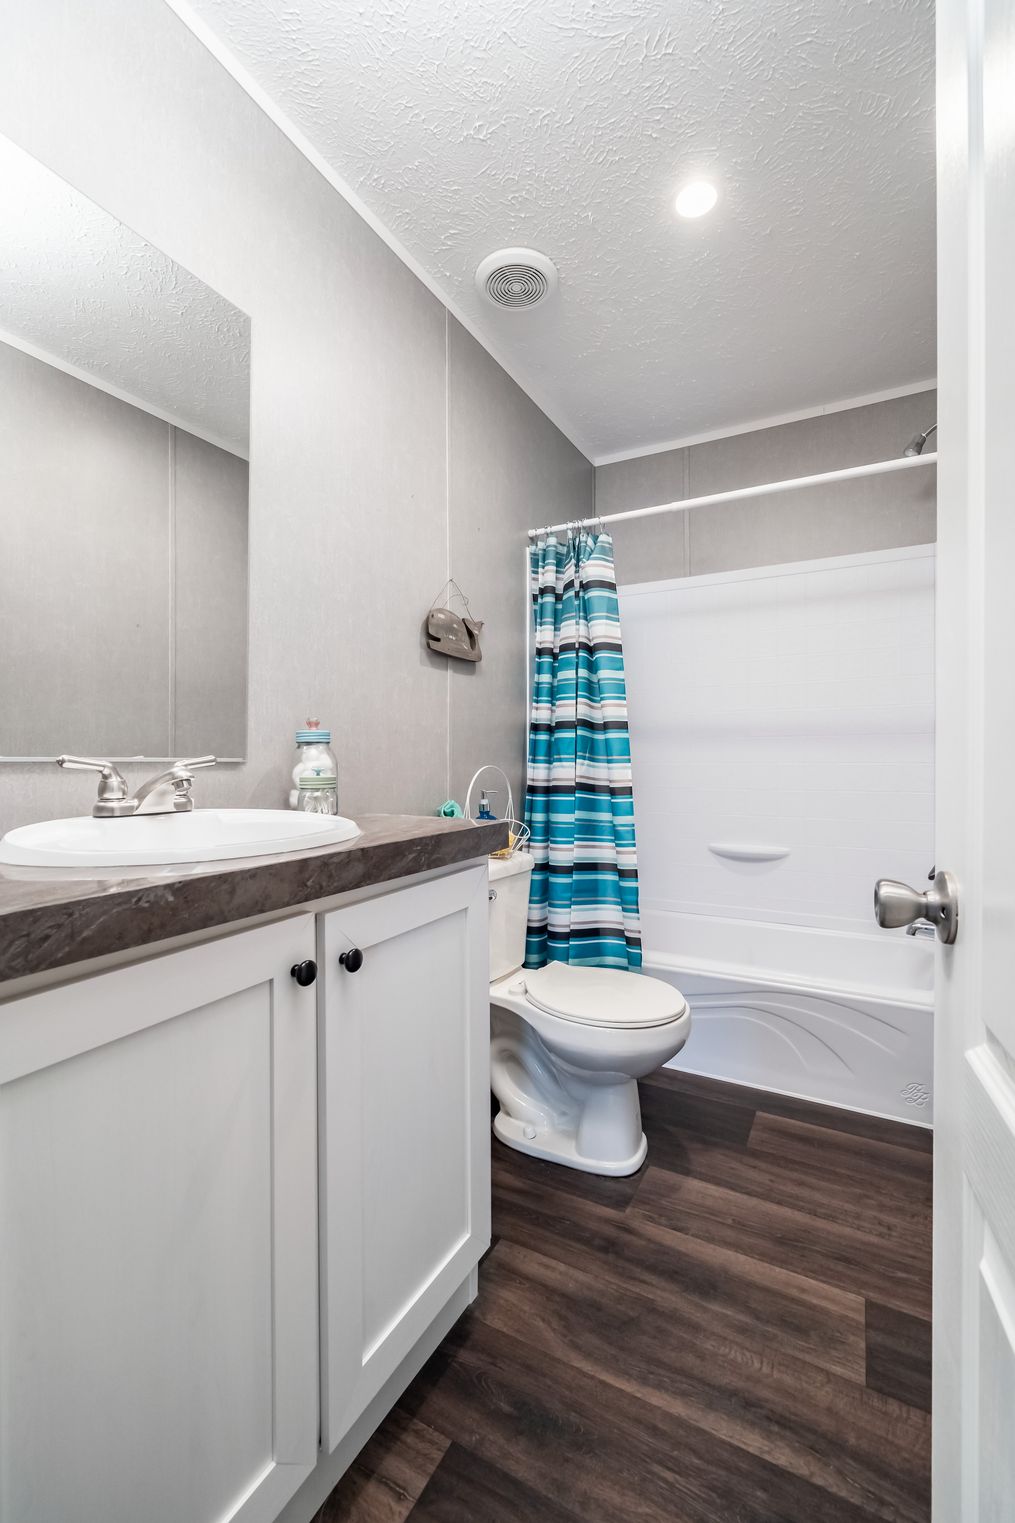 The THE EAGLE 76 Guest Bathroom. This Manufactured Mobile Home features 5 bedrooms and 2 baths.